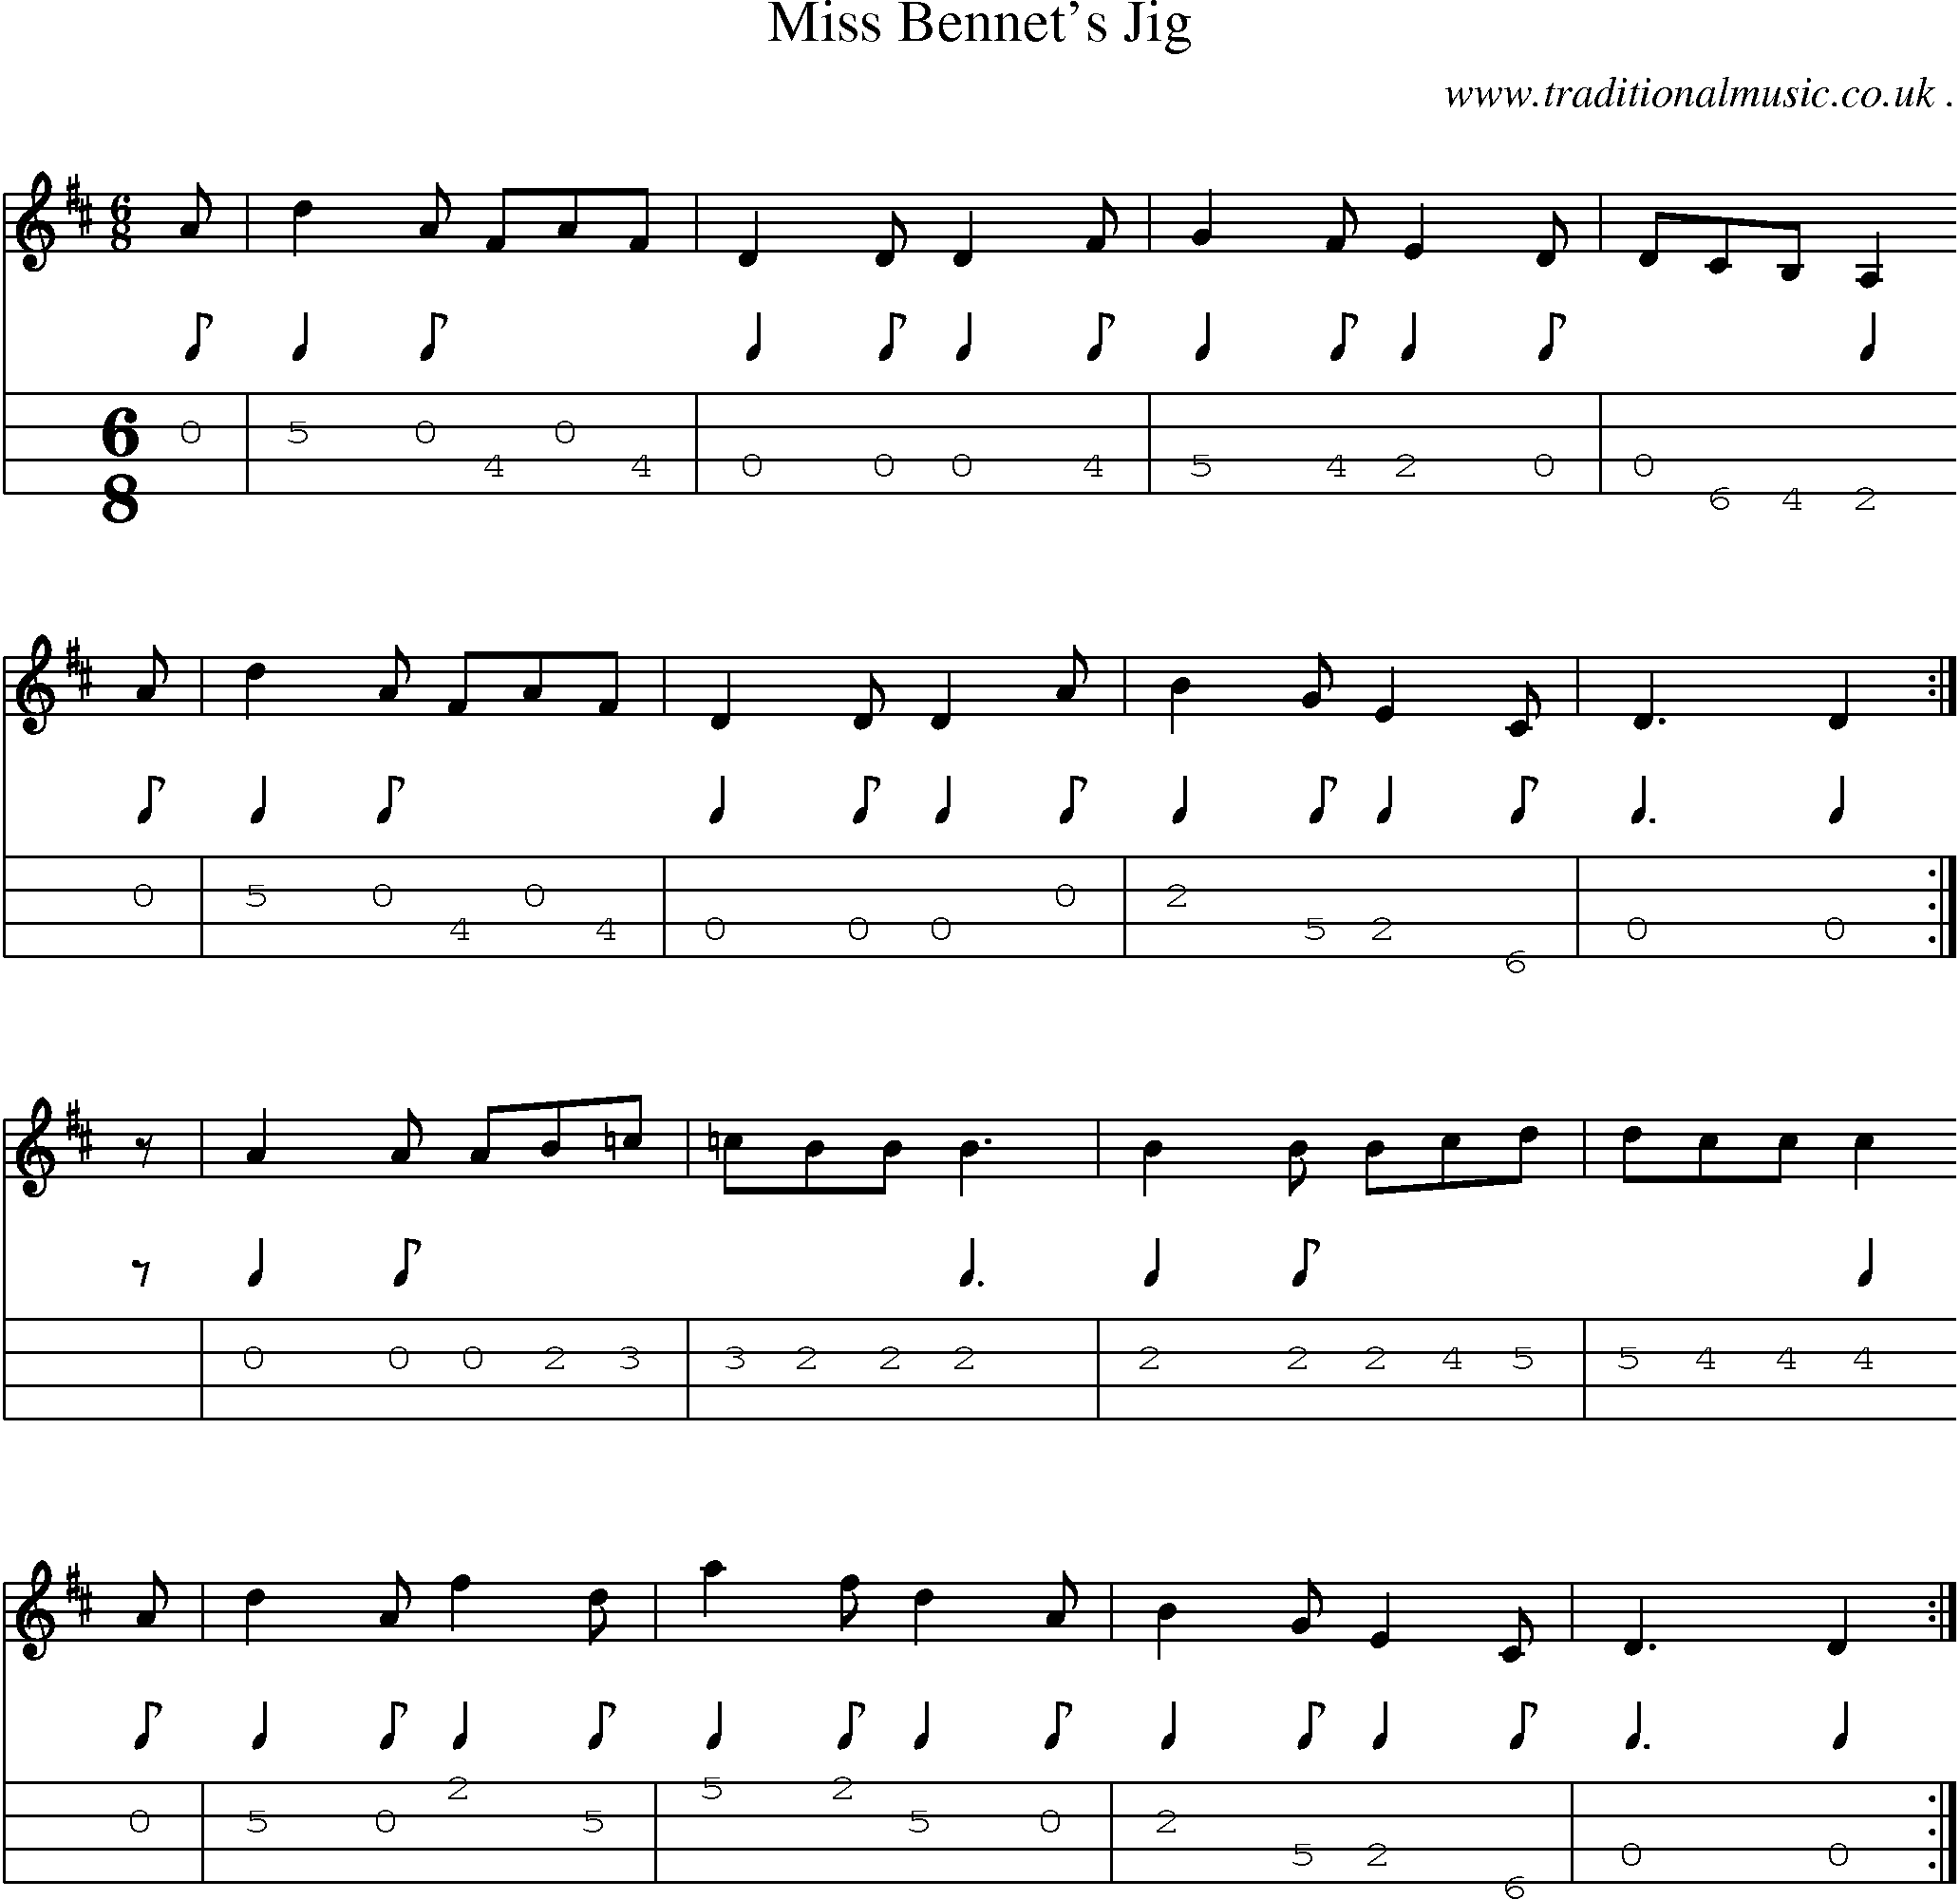 Sheet-music  score, Chords and Mandolin Tabs for Miss Bennets Jig